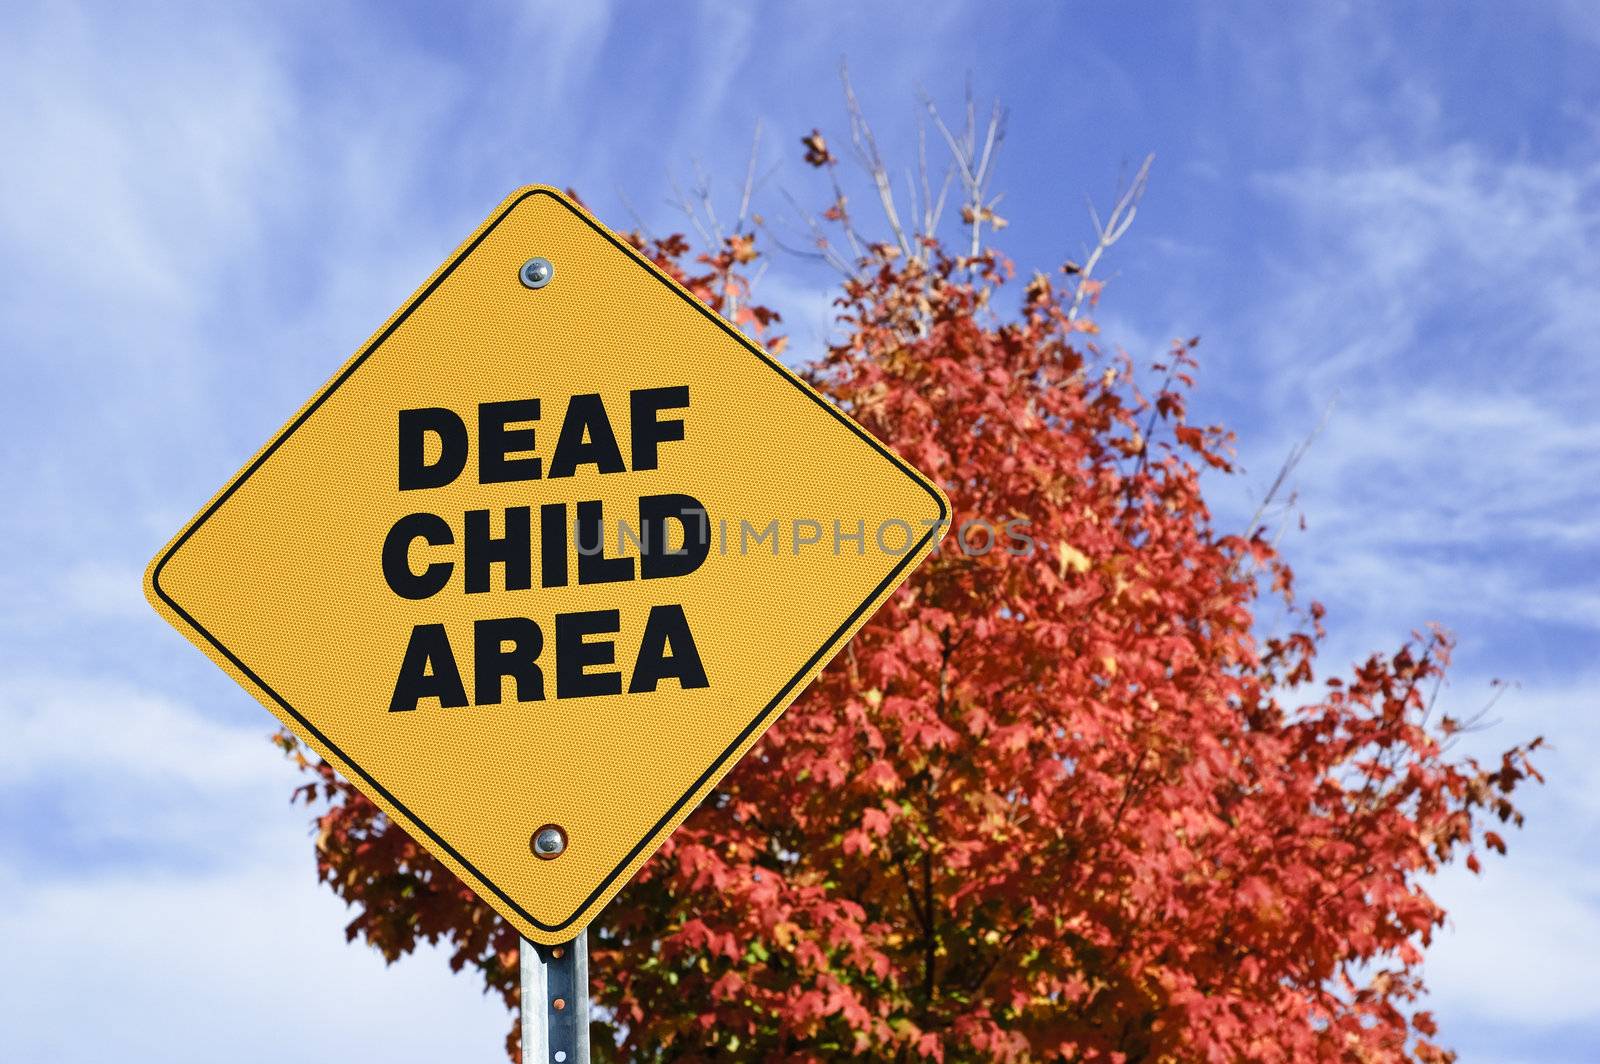 Yellow street sign warning about deaf child